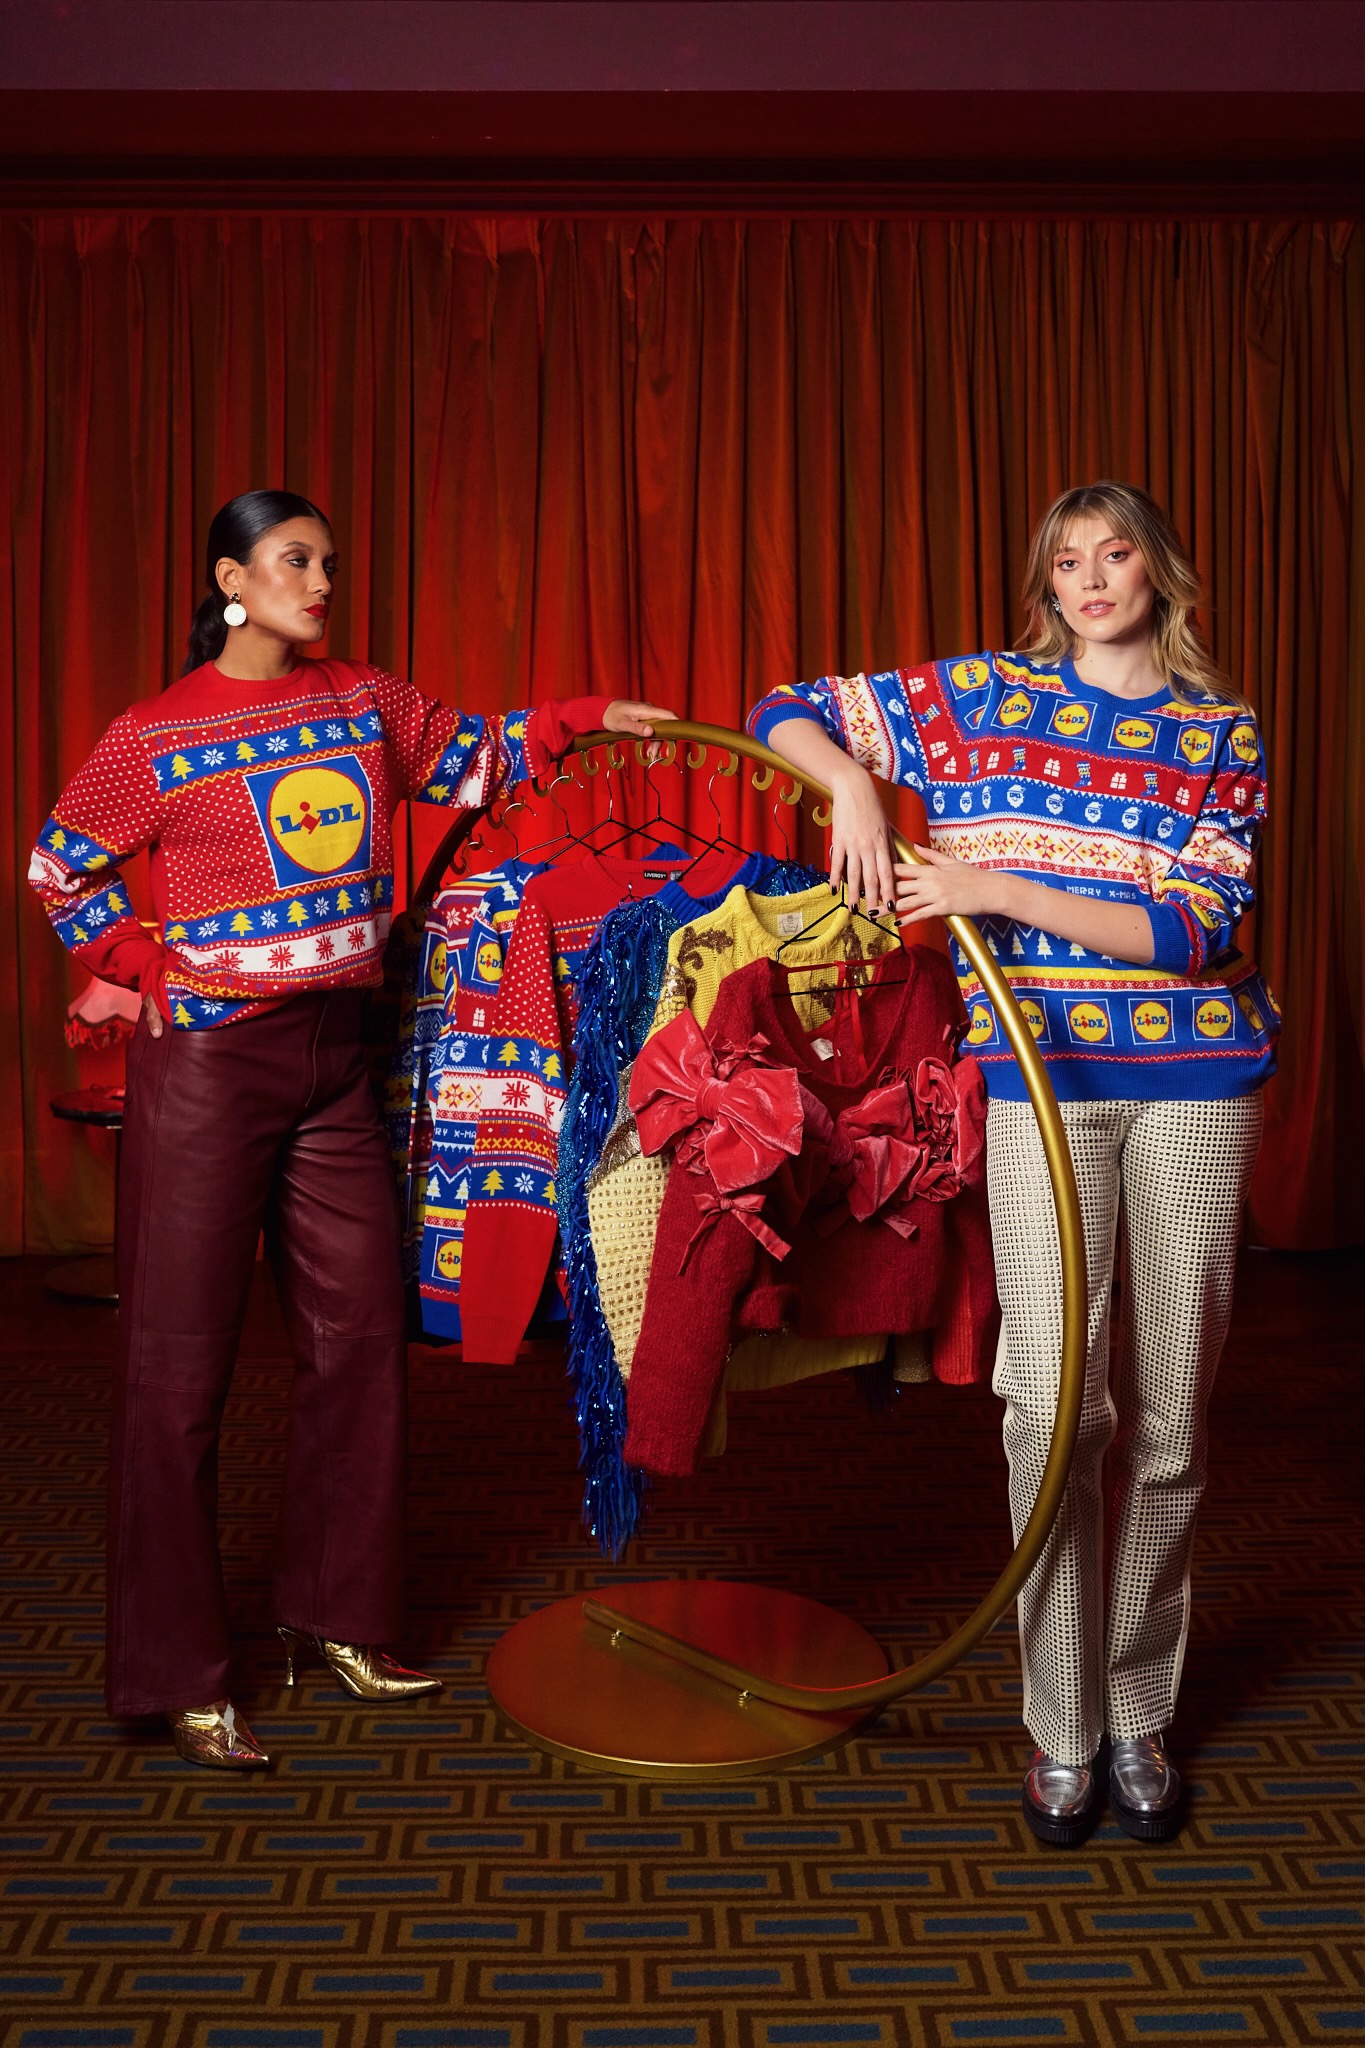 Lidl's full Christmas jumper collection, available for rent for the first time this year. (Lidl/PA)